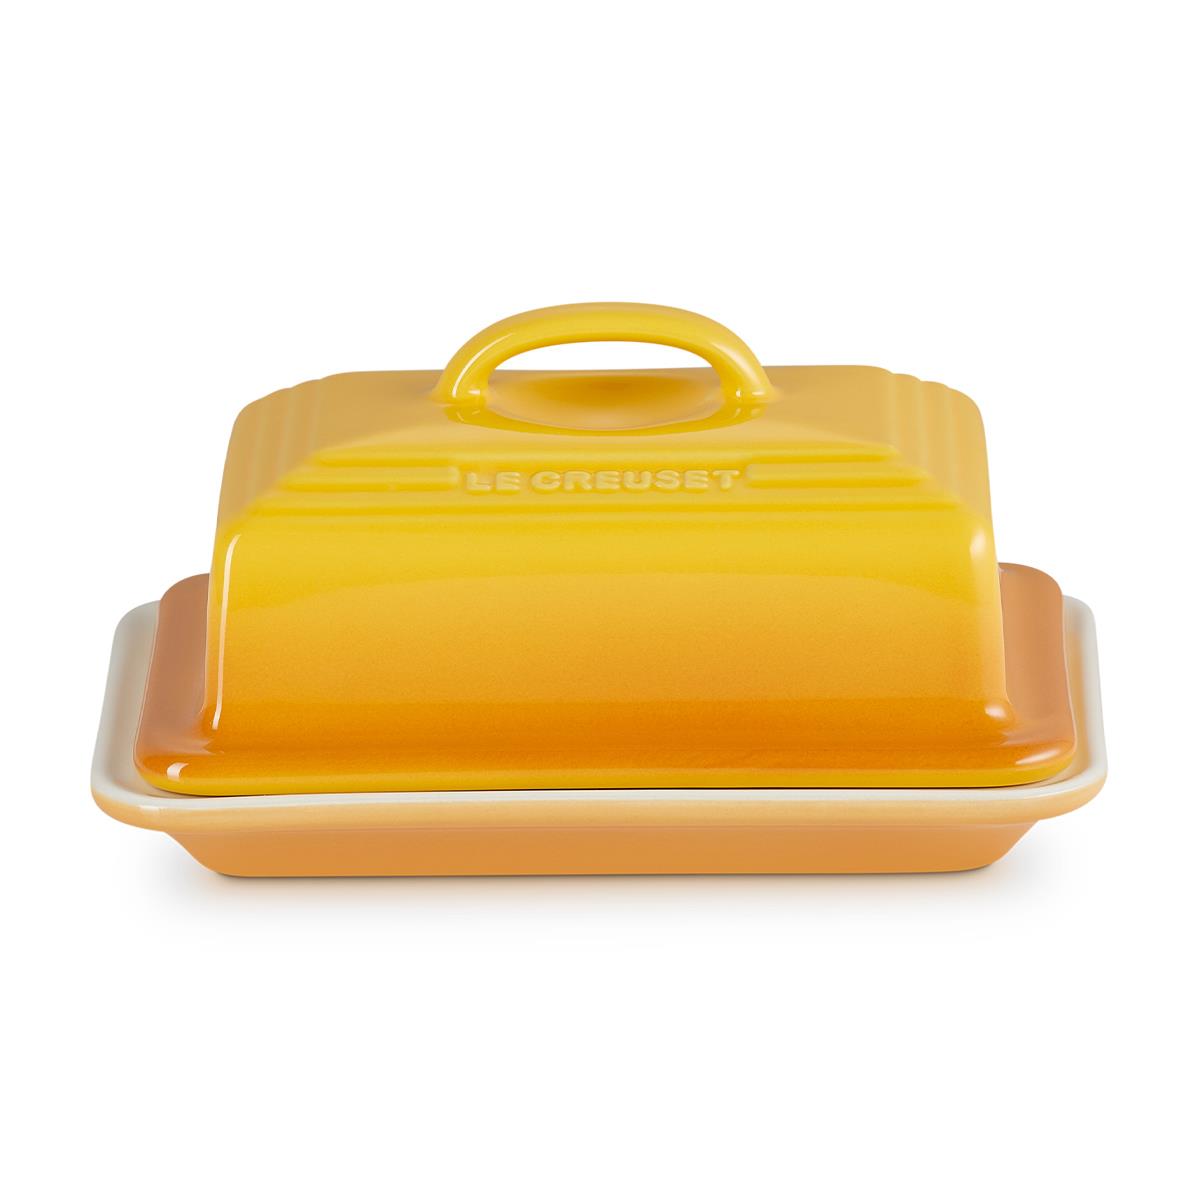 Le Creuset Stoneware Butter Dish Questions & Answers